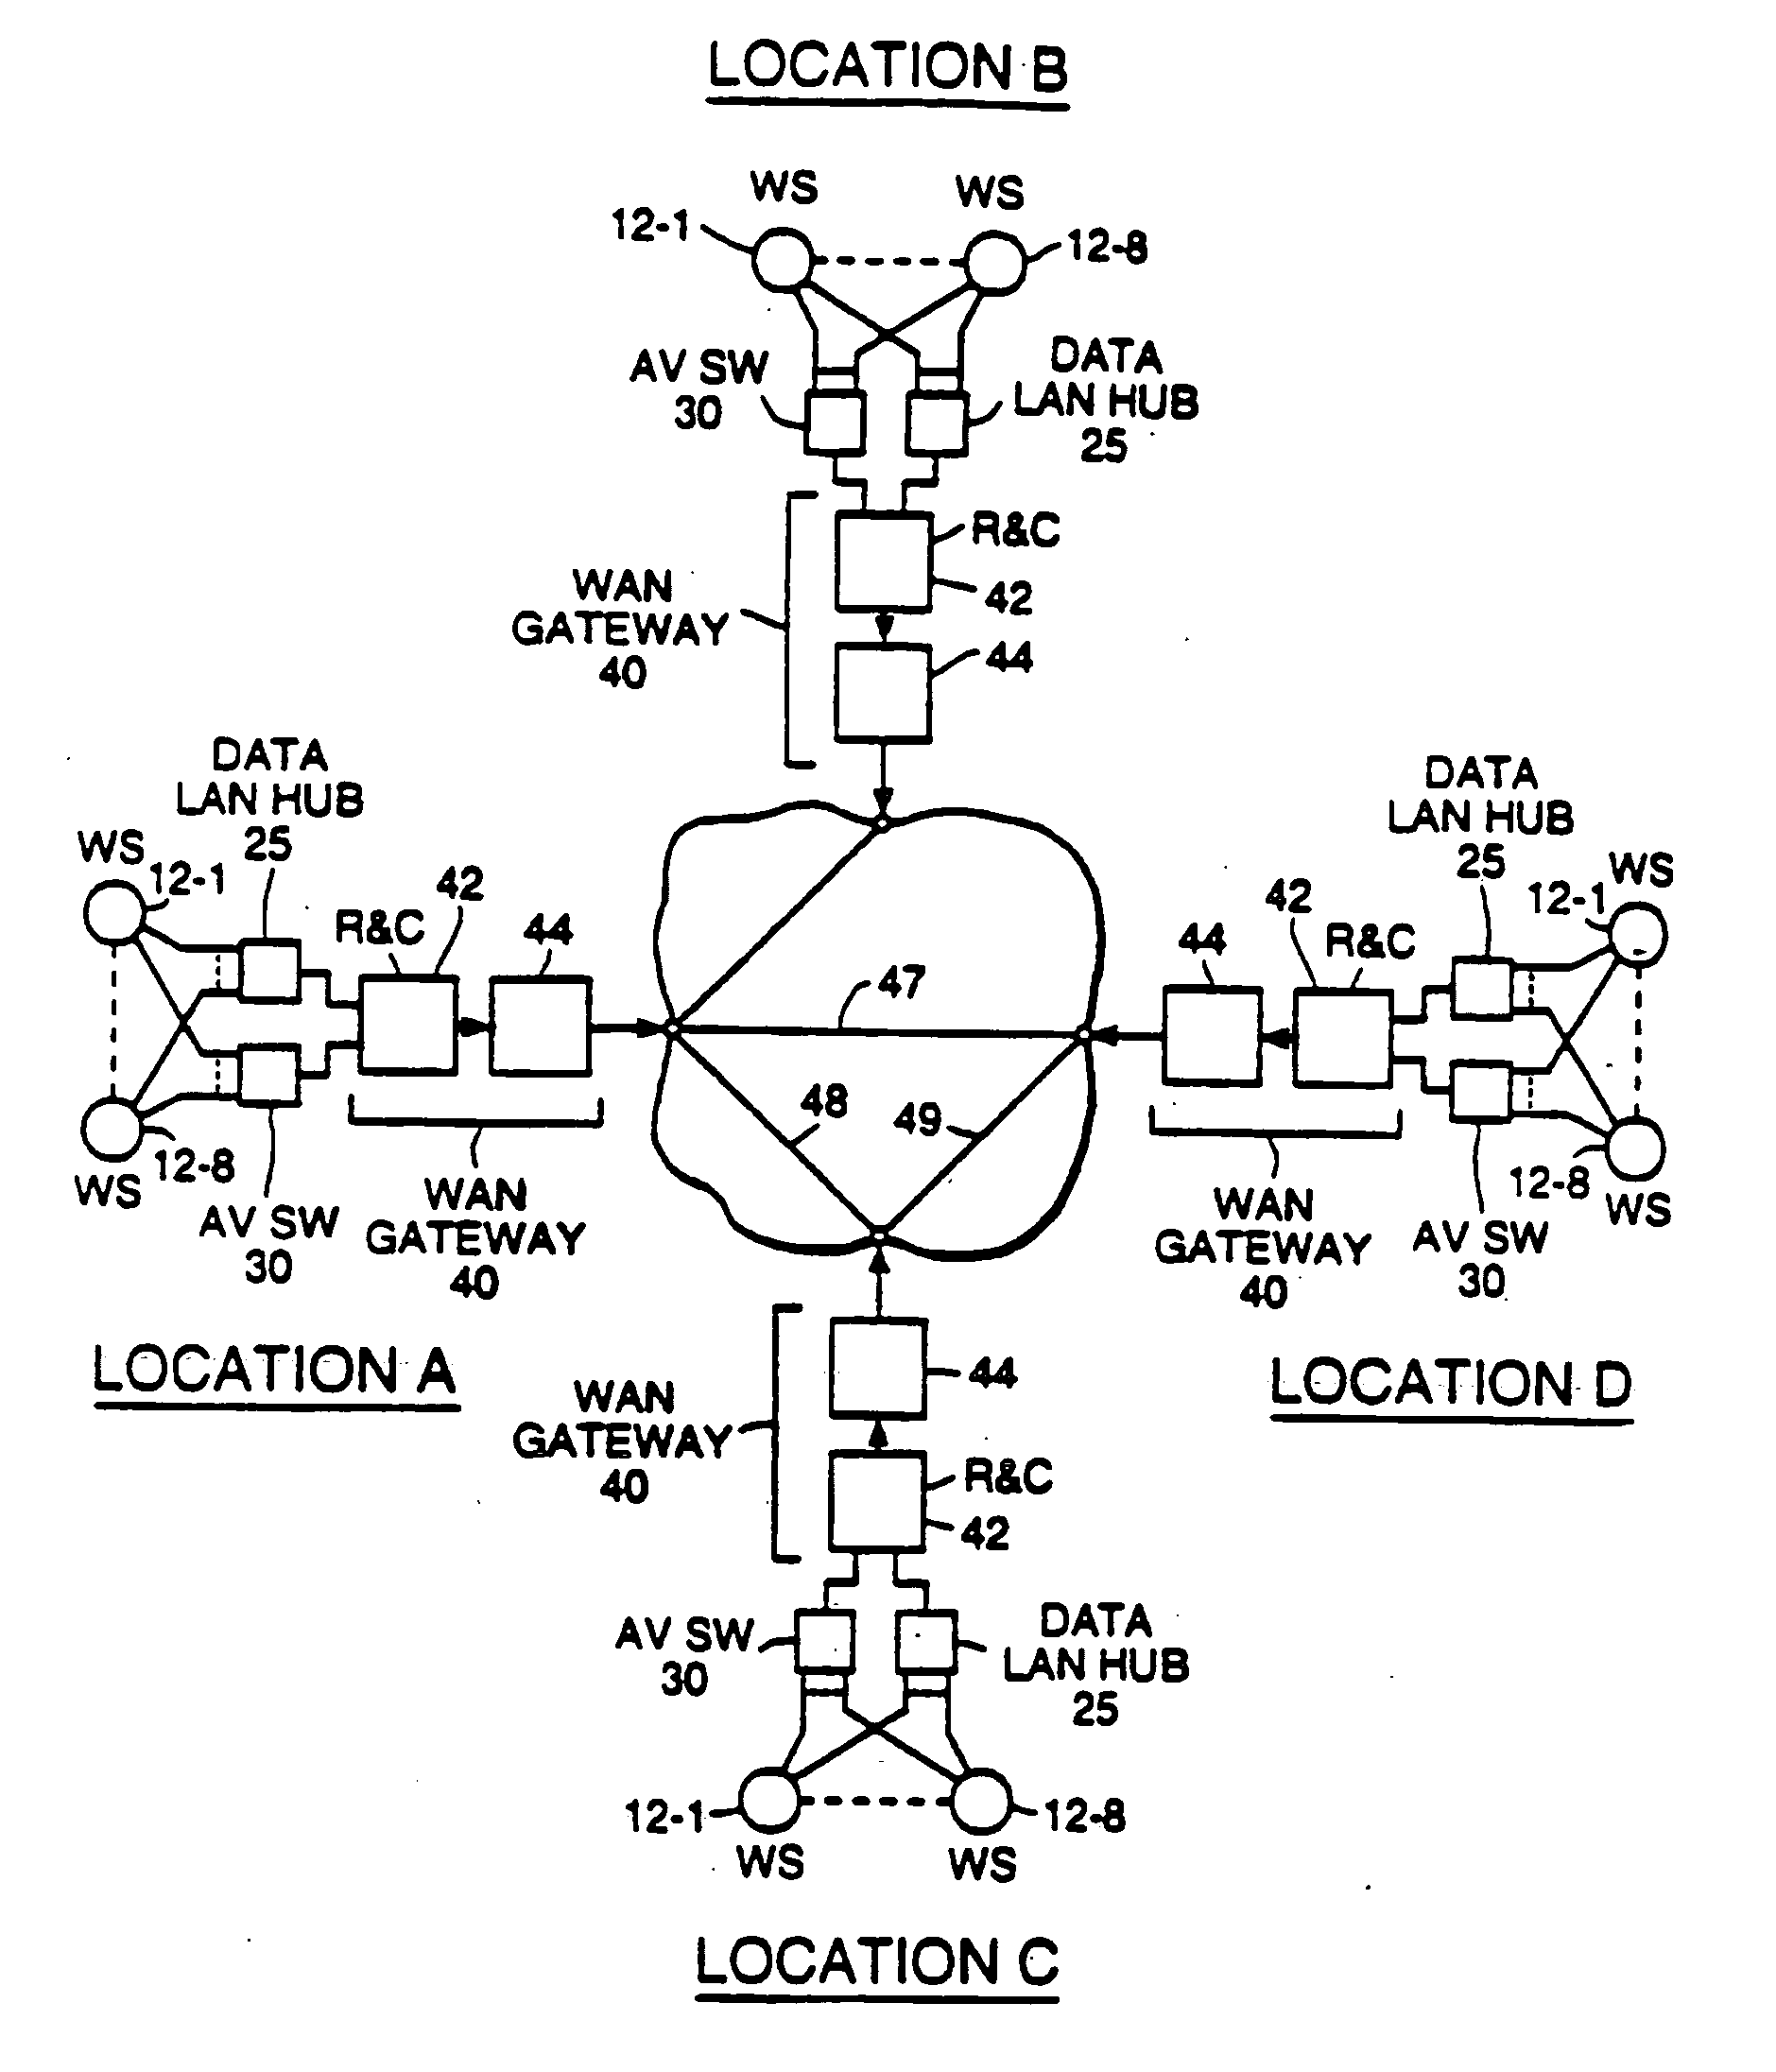 Log-in based communications plus two data types